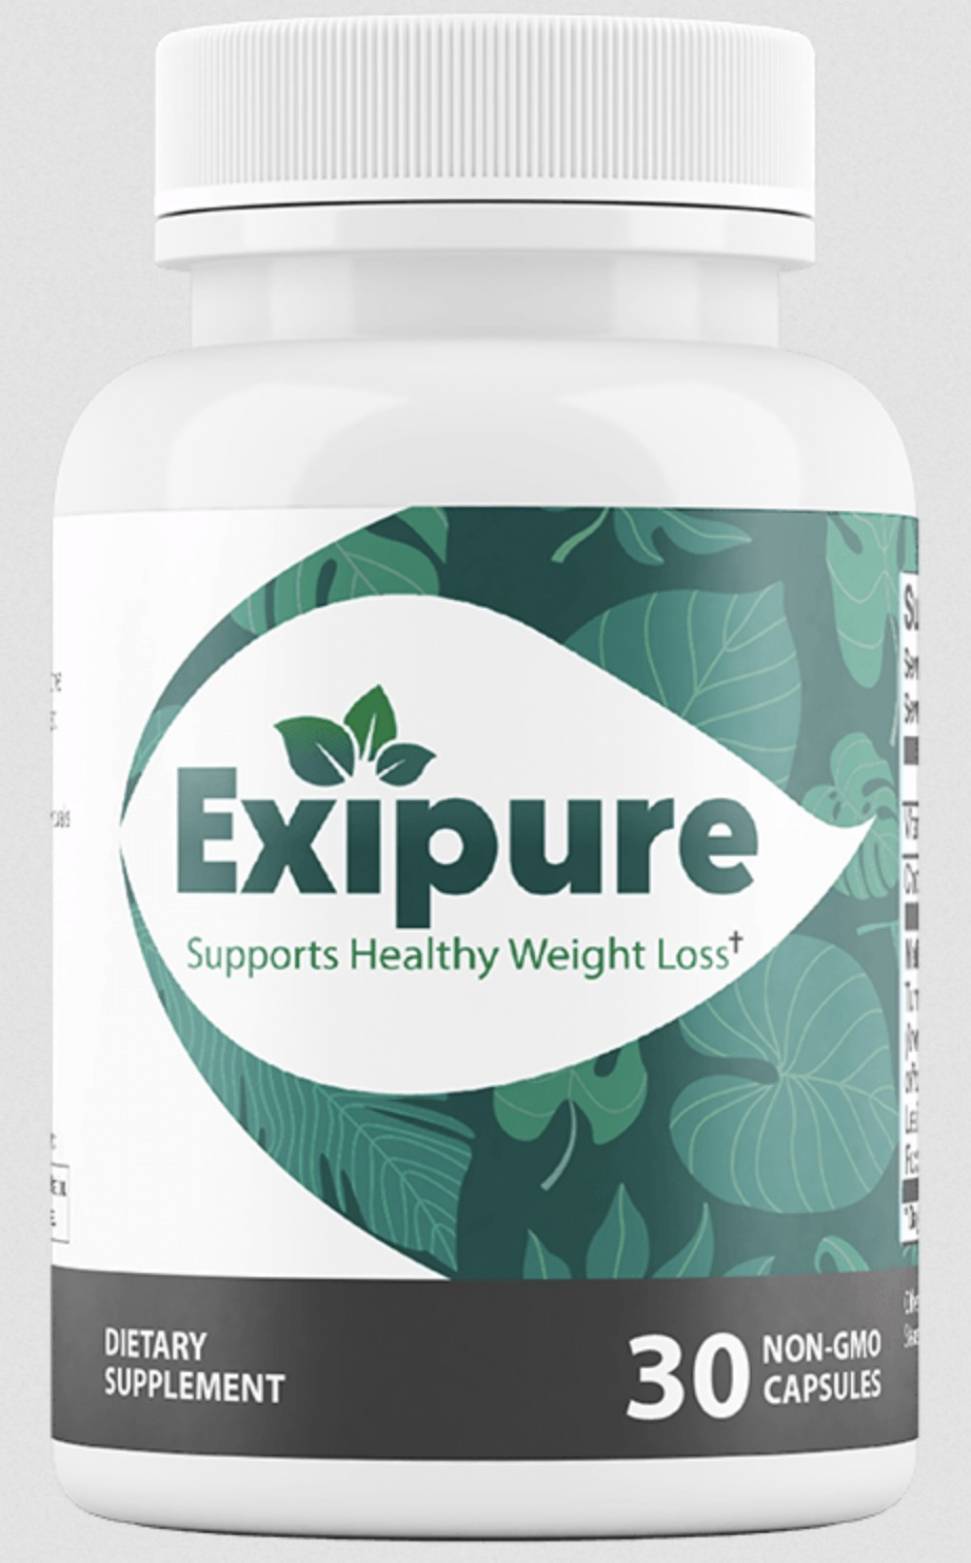 How Safe Is Exipure